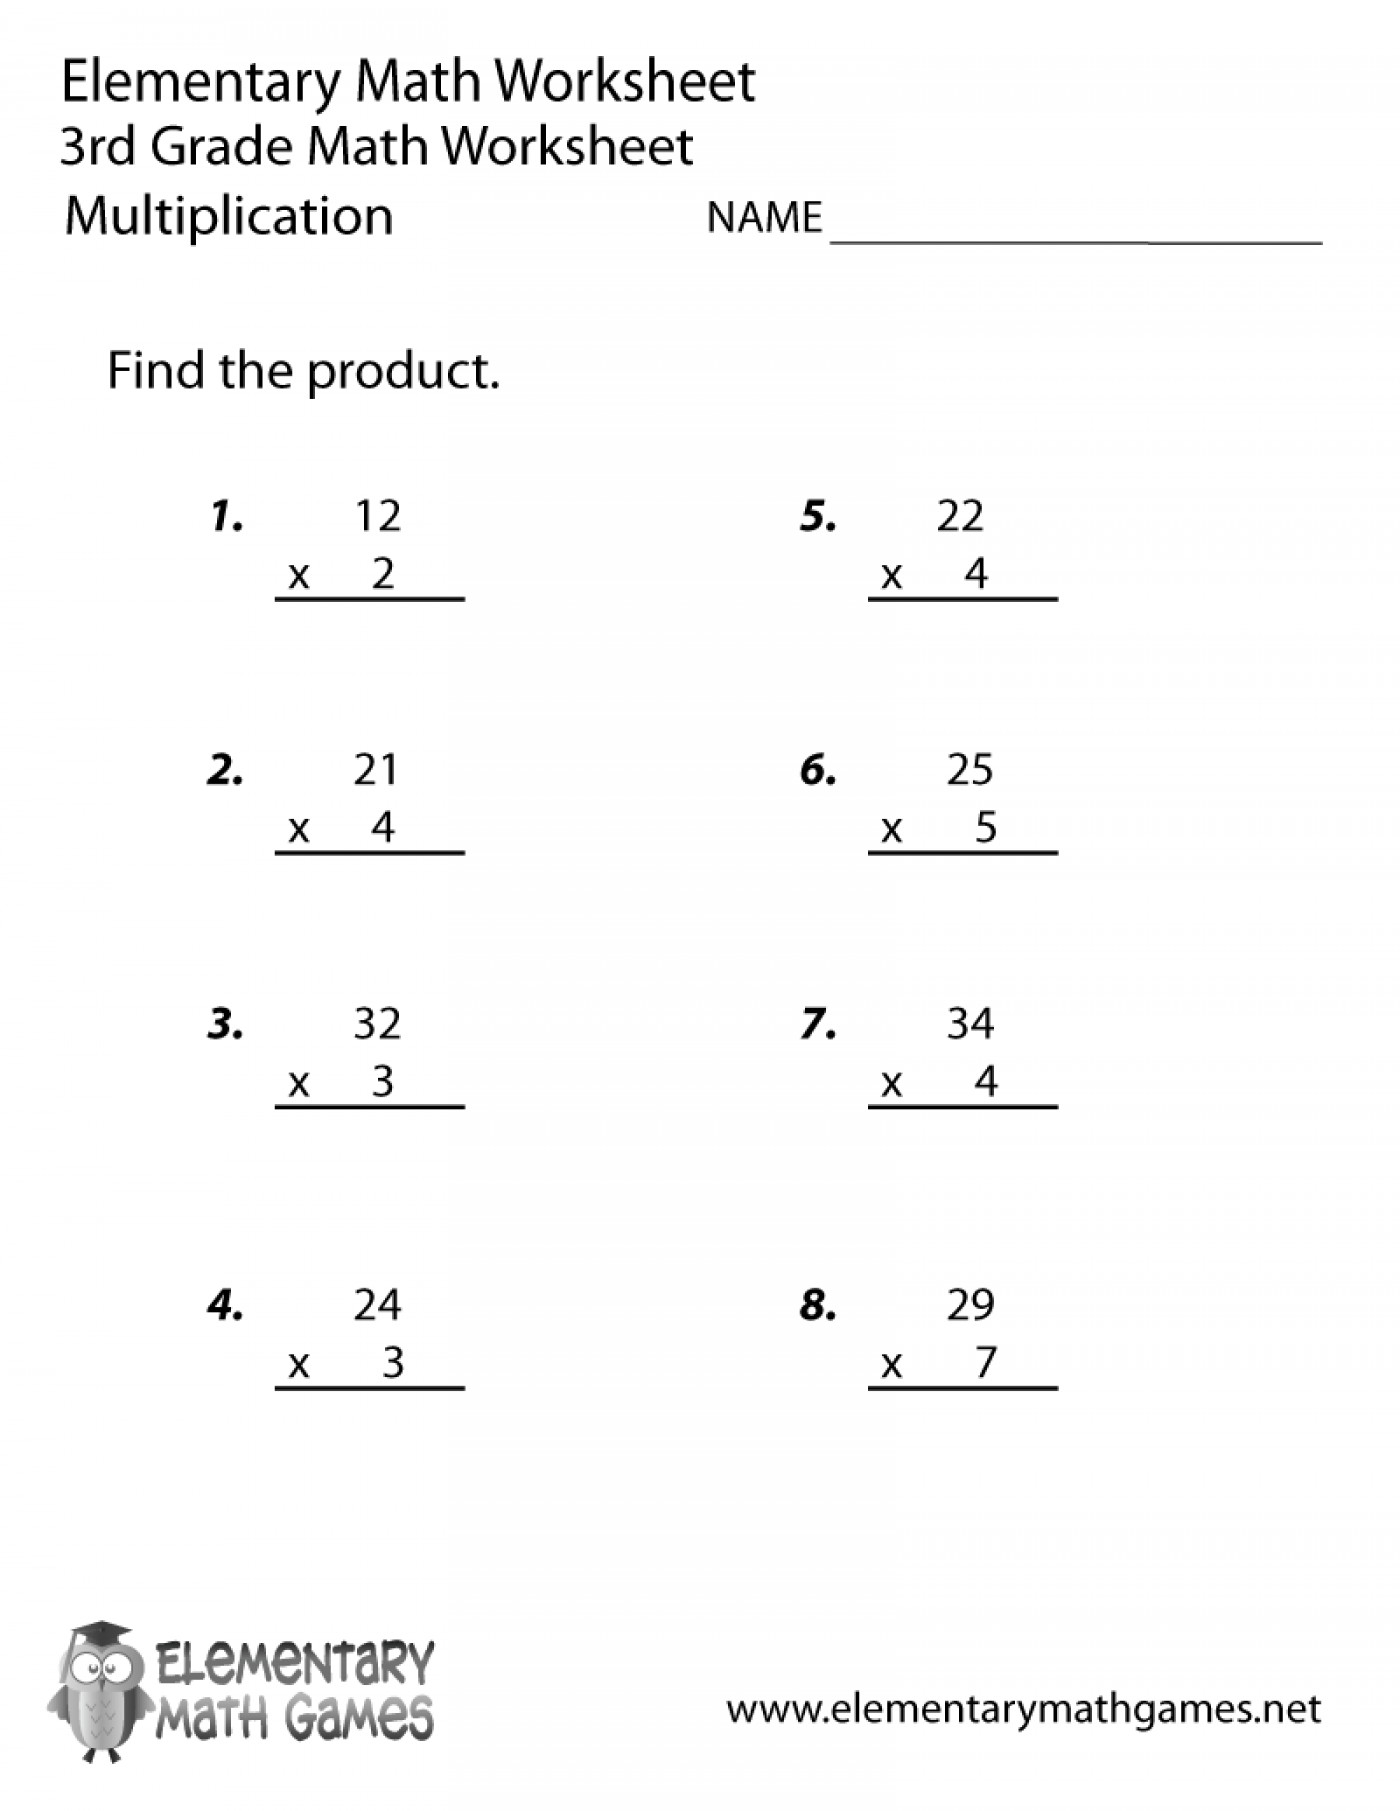 third grade division worksheets db excelcom